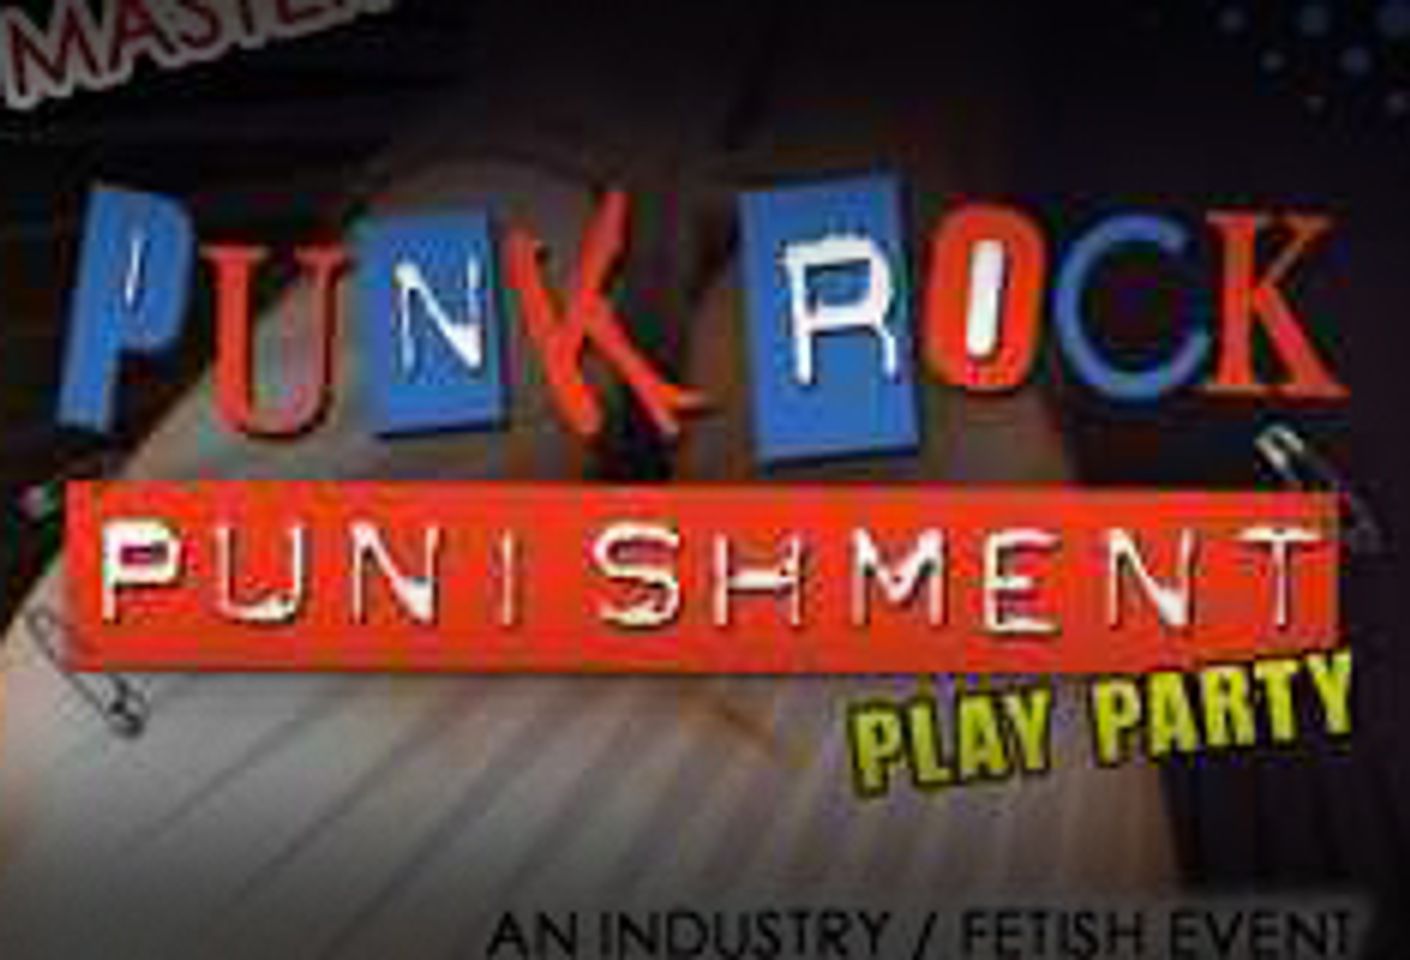 TightFit, Master Dominic to Do &#8216;Punk Rock Punishment Play Party&#8217;